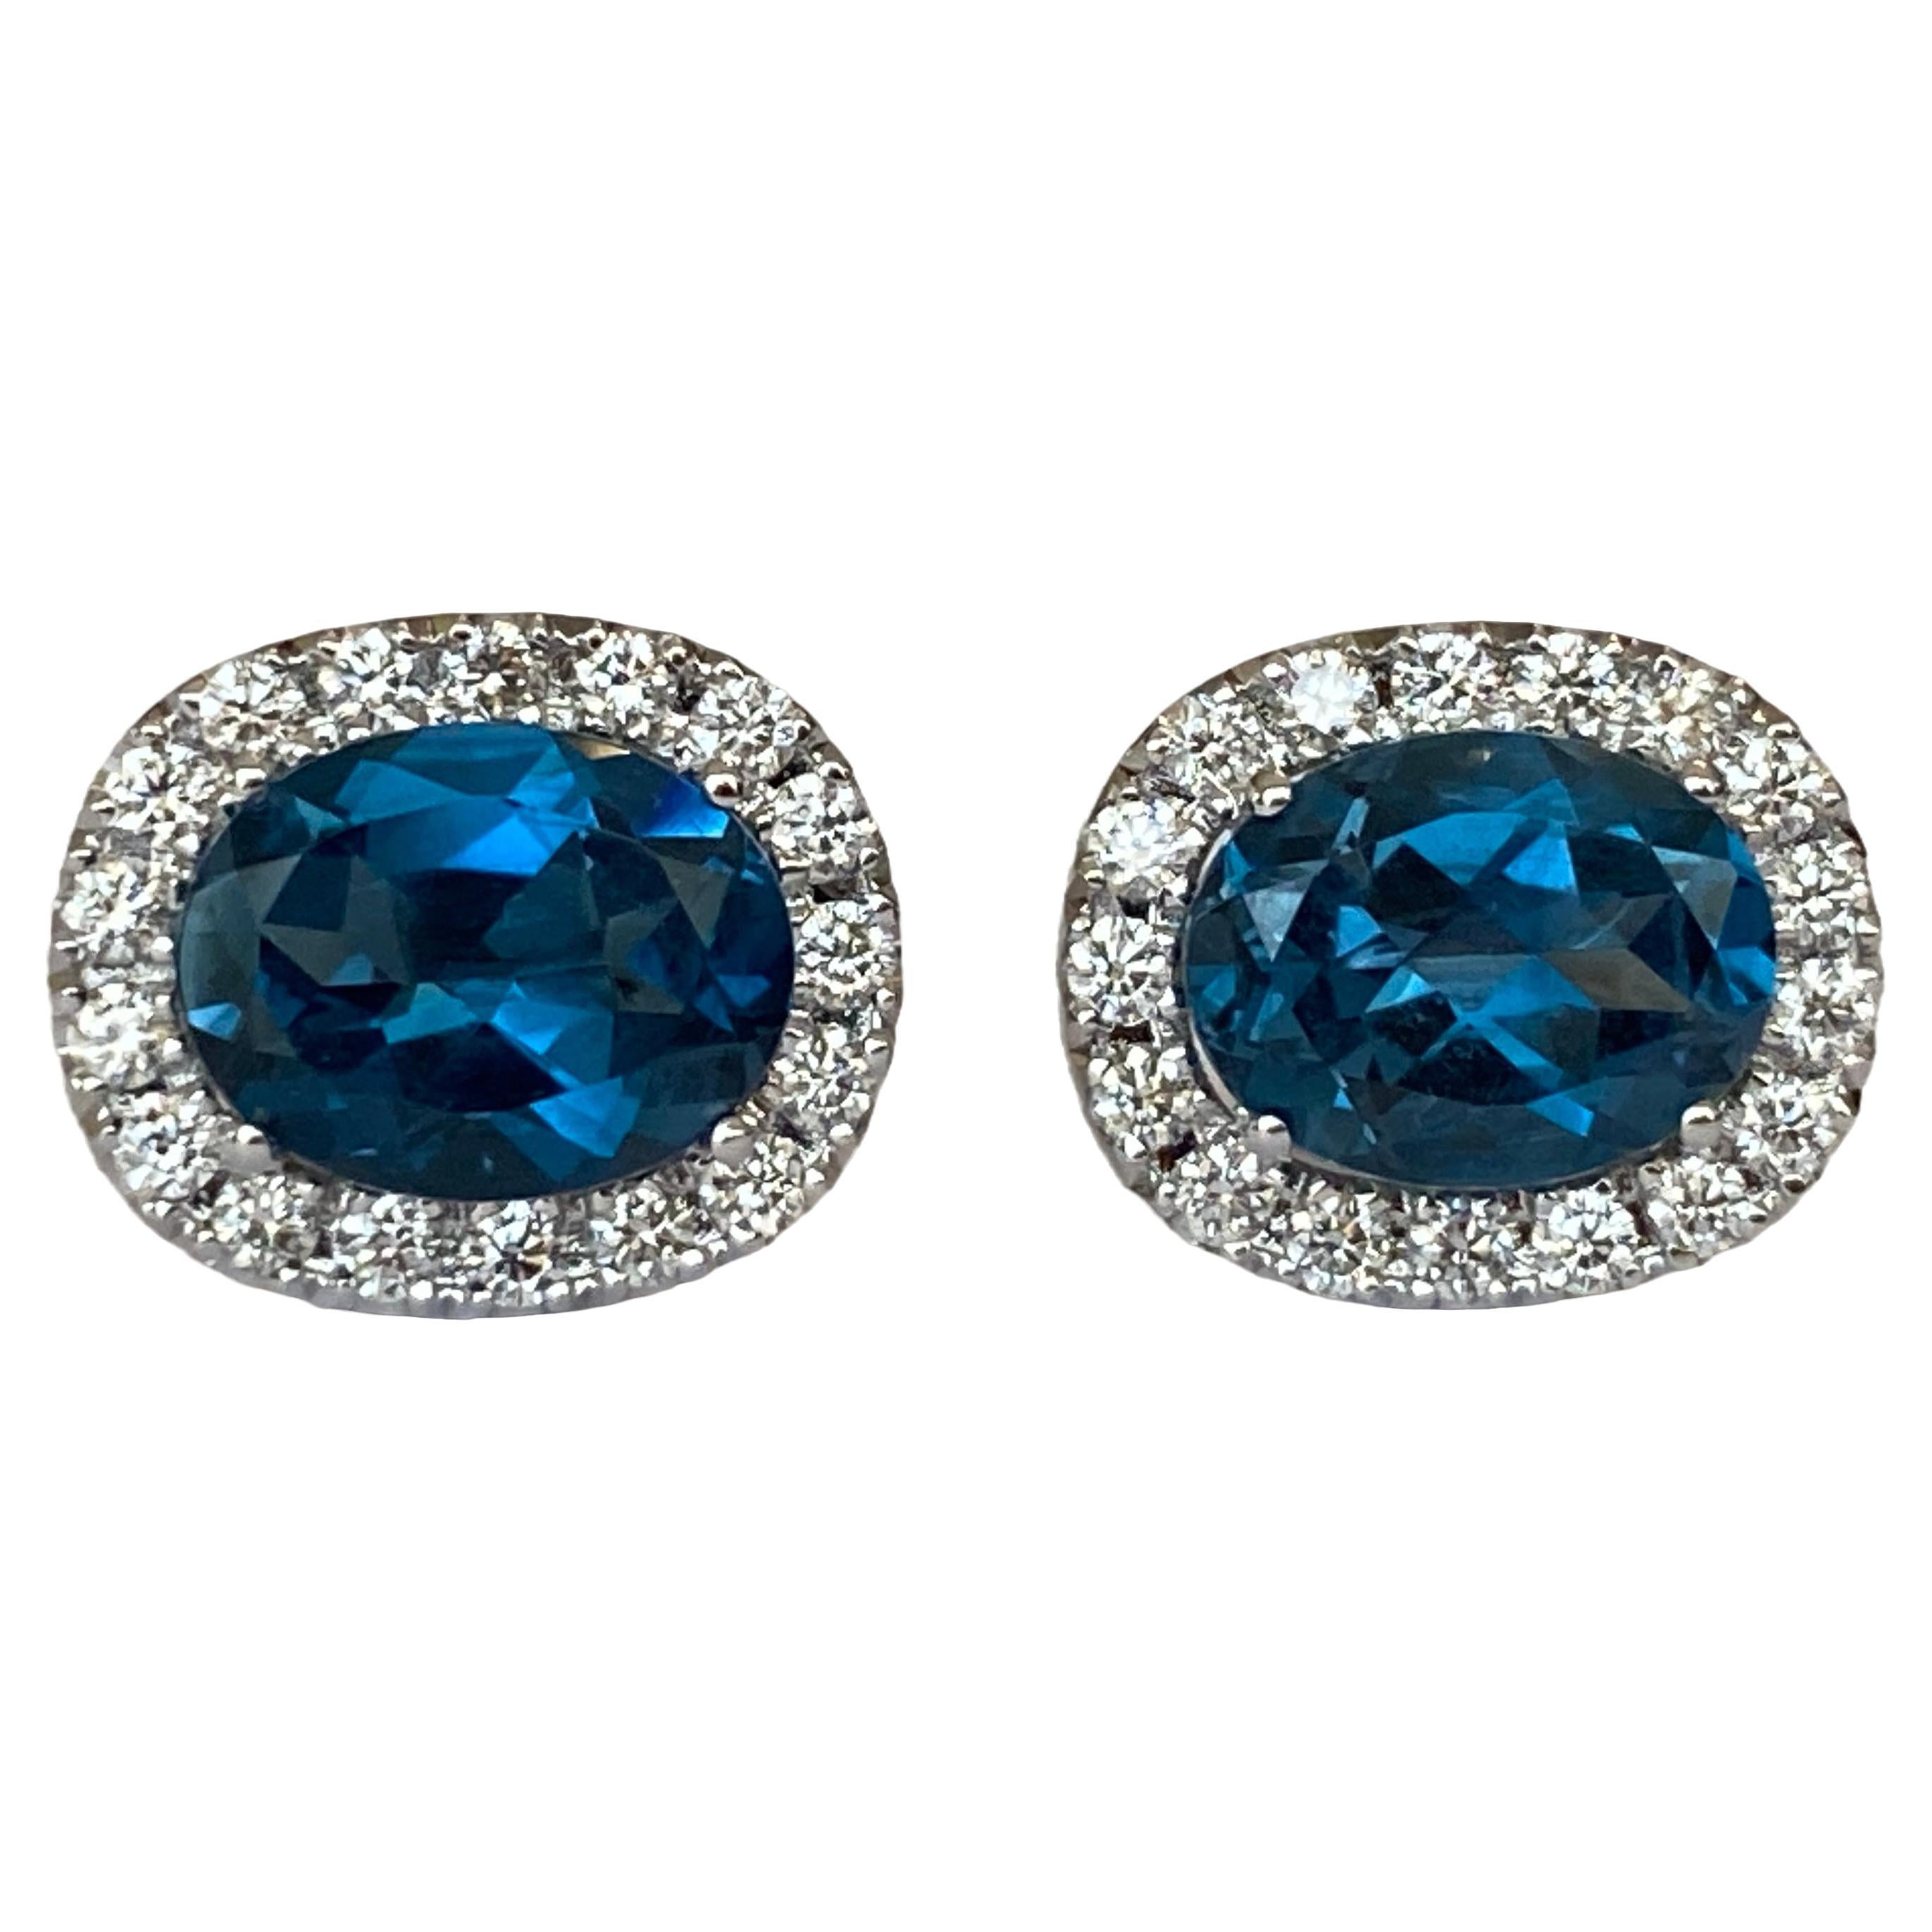 18 kt white gold Diamond earrings studs with London Blue Topaz For Sale